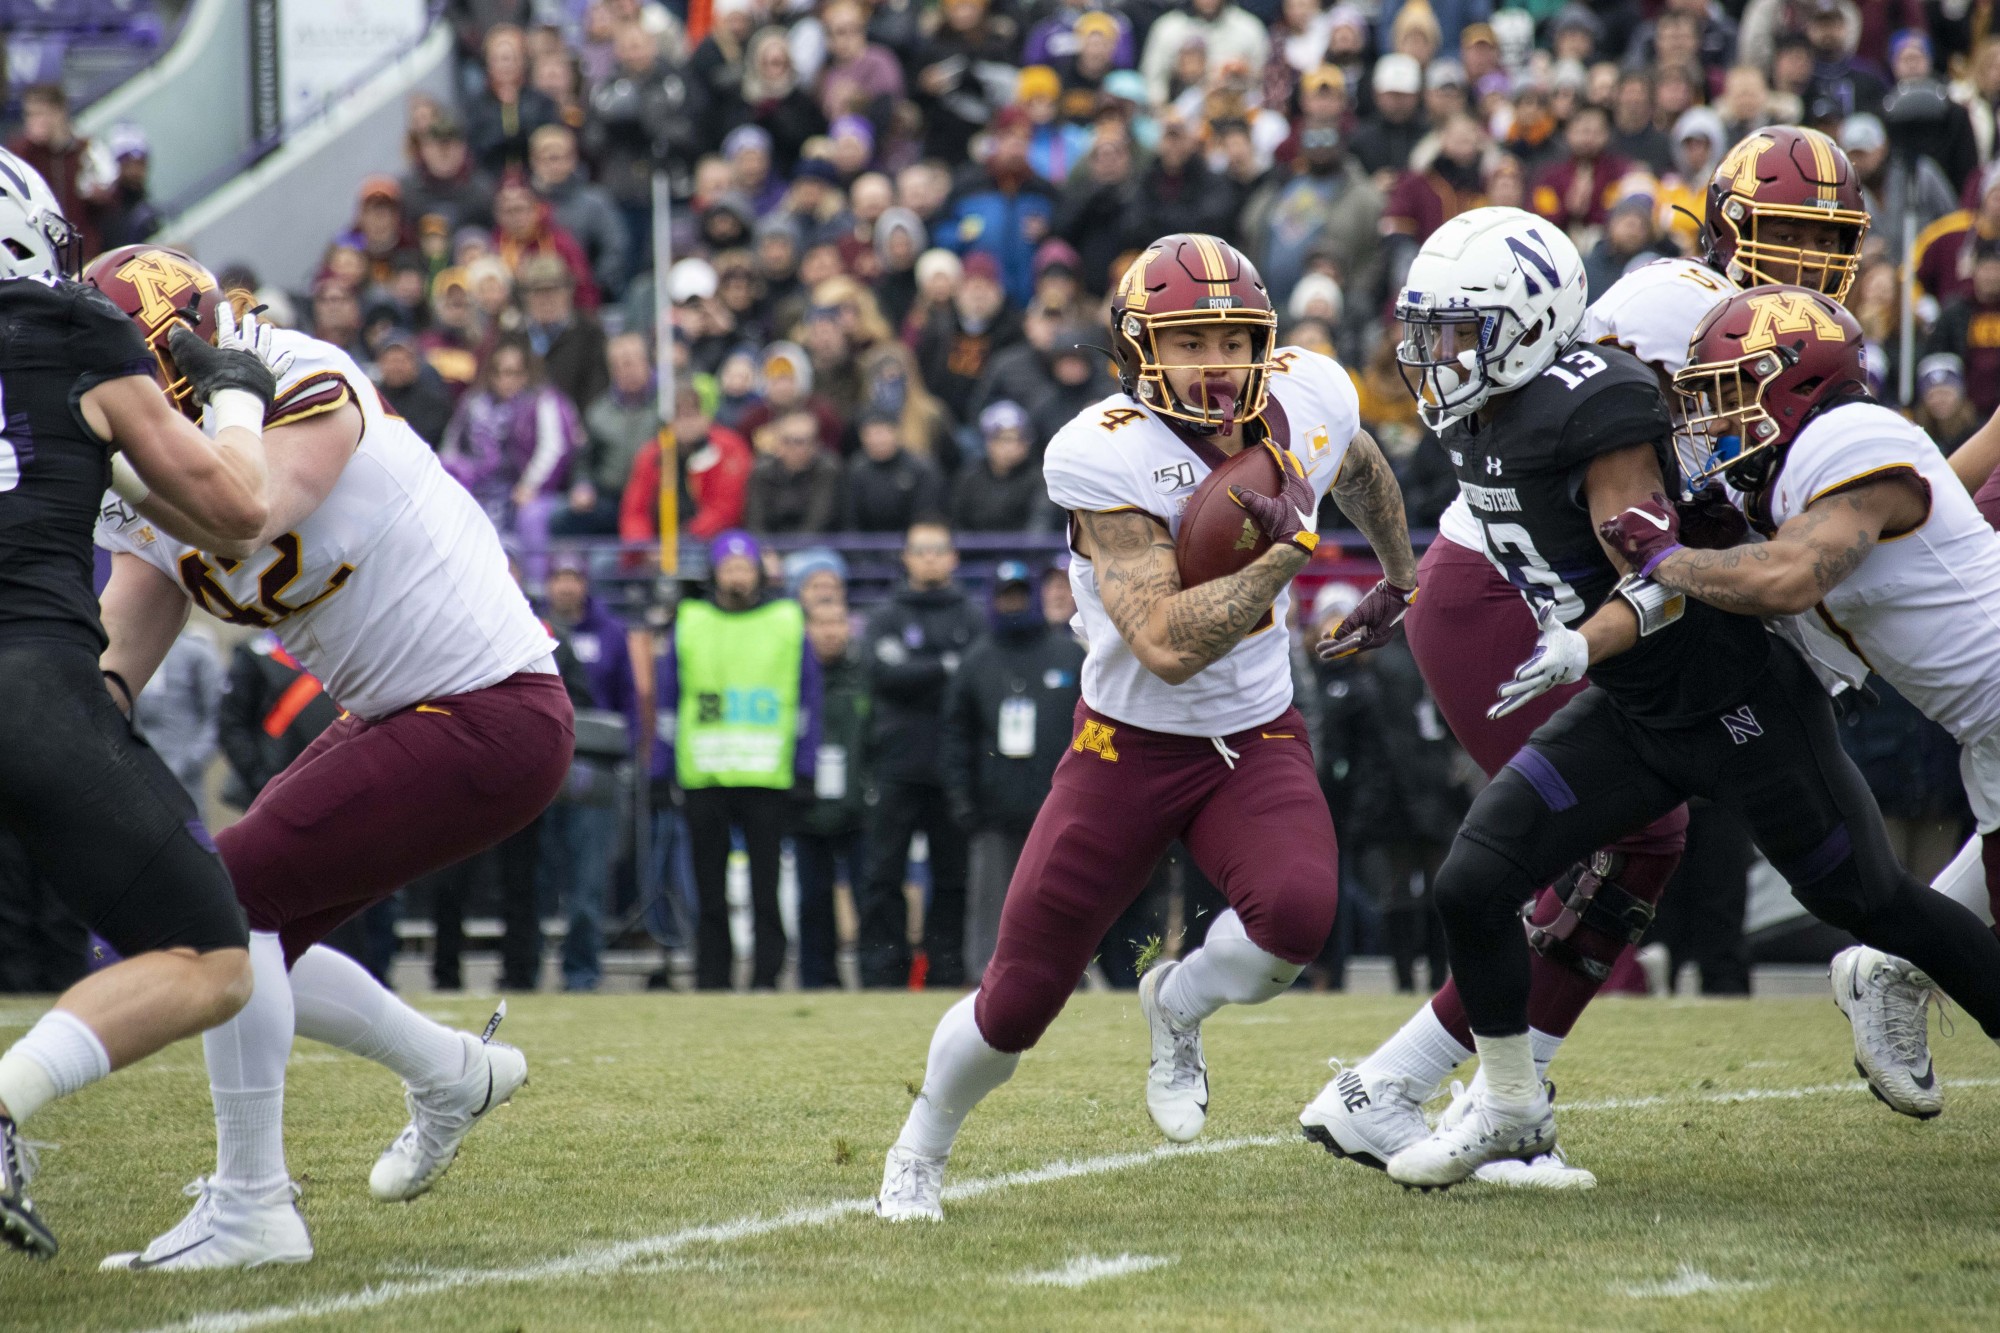 Running back Shannon Brooks carries the ball at Ryan Field during the game against the Northwestern Wildcats on Saturday, Nov. 23. The Gophers earned a 38-22 victory bringing their record to 10-1.